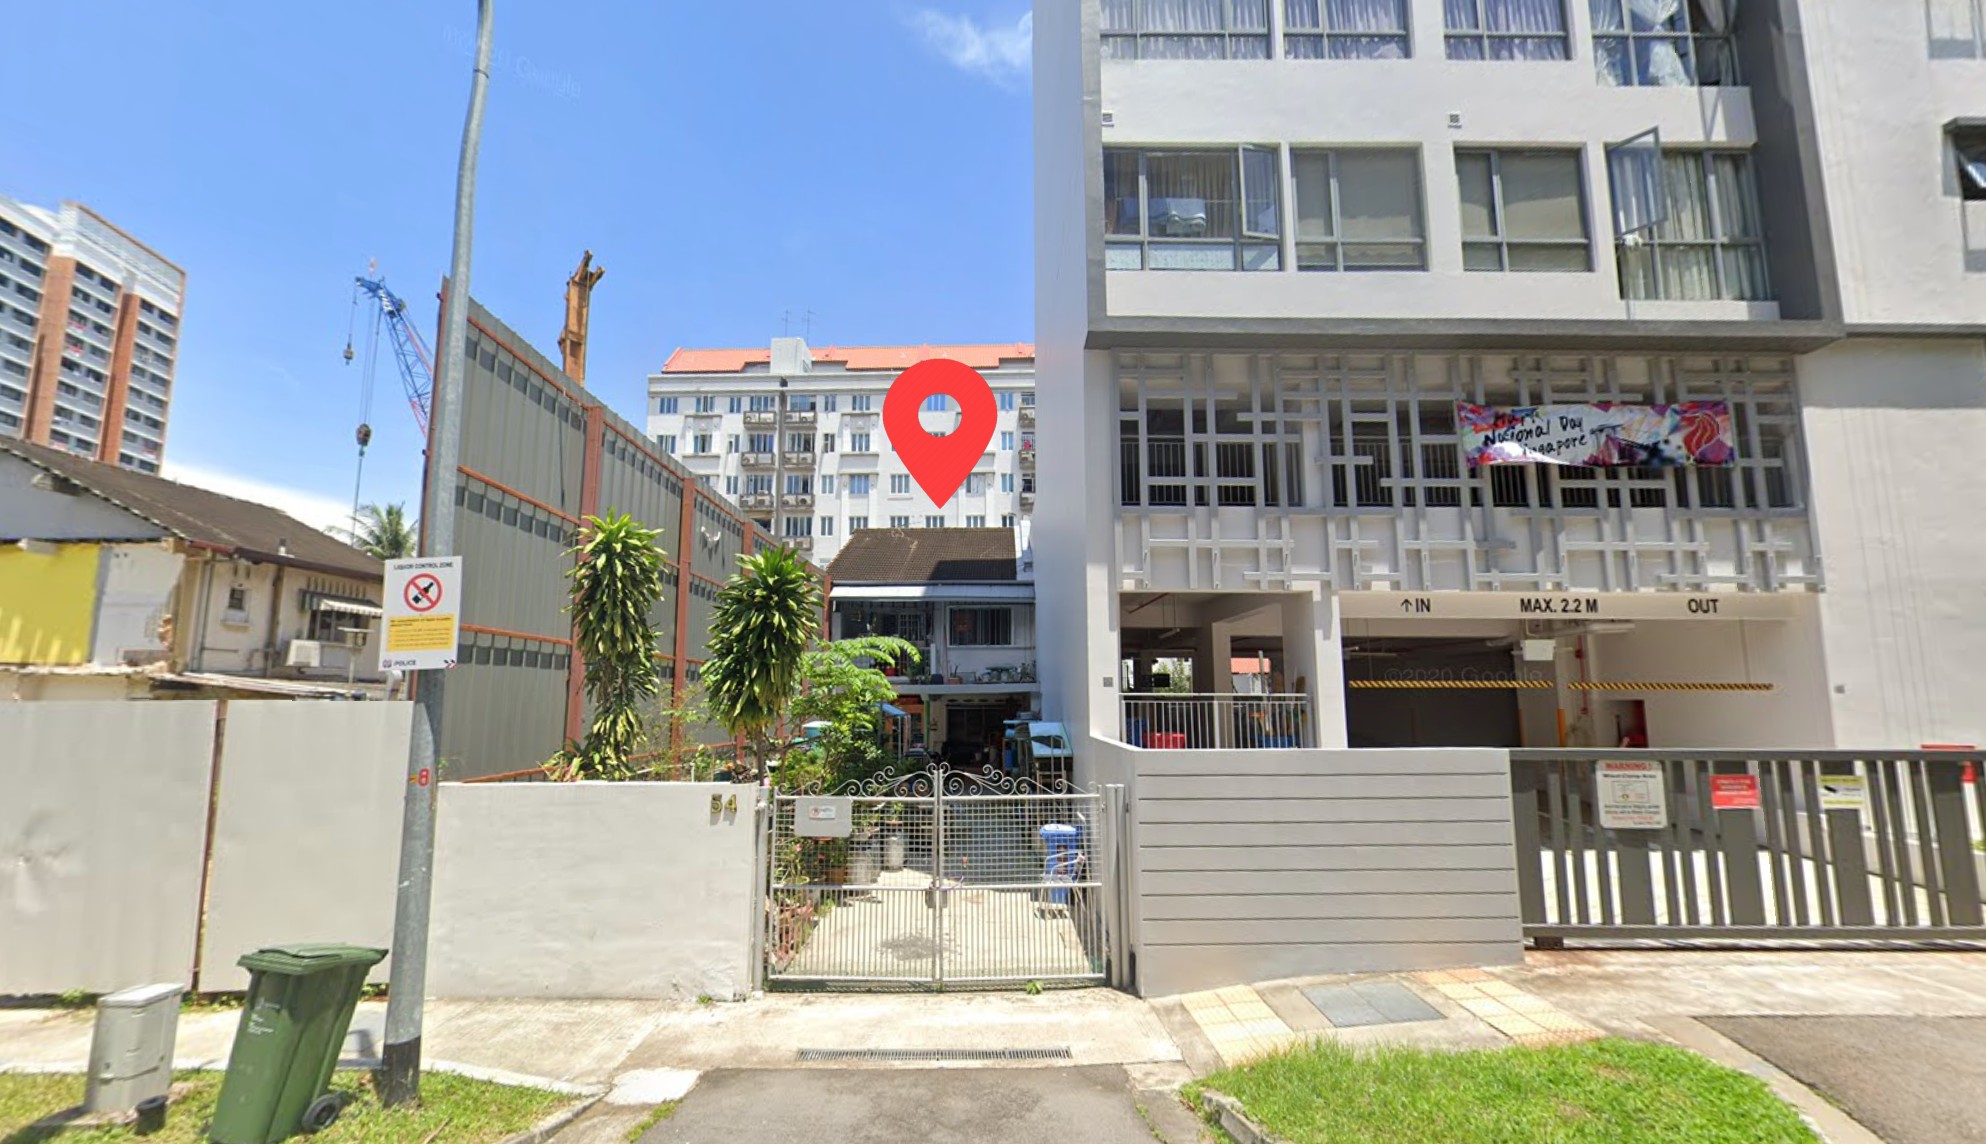 Goh’s house at Guillemard Road that will be sandwiched between two condominiums. Photo: Google Maps
